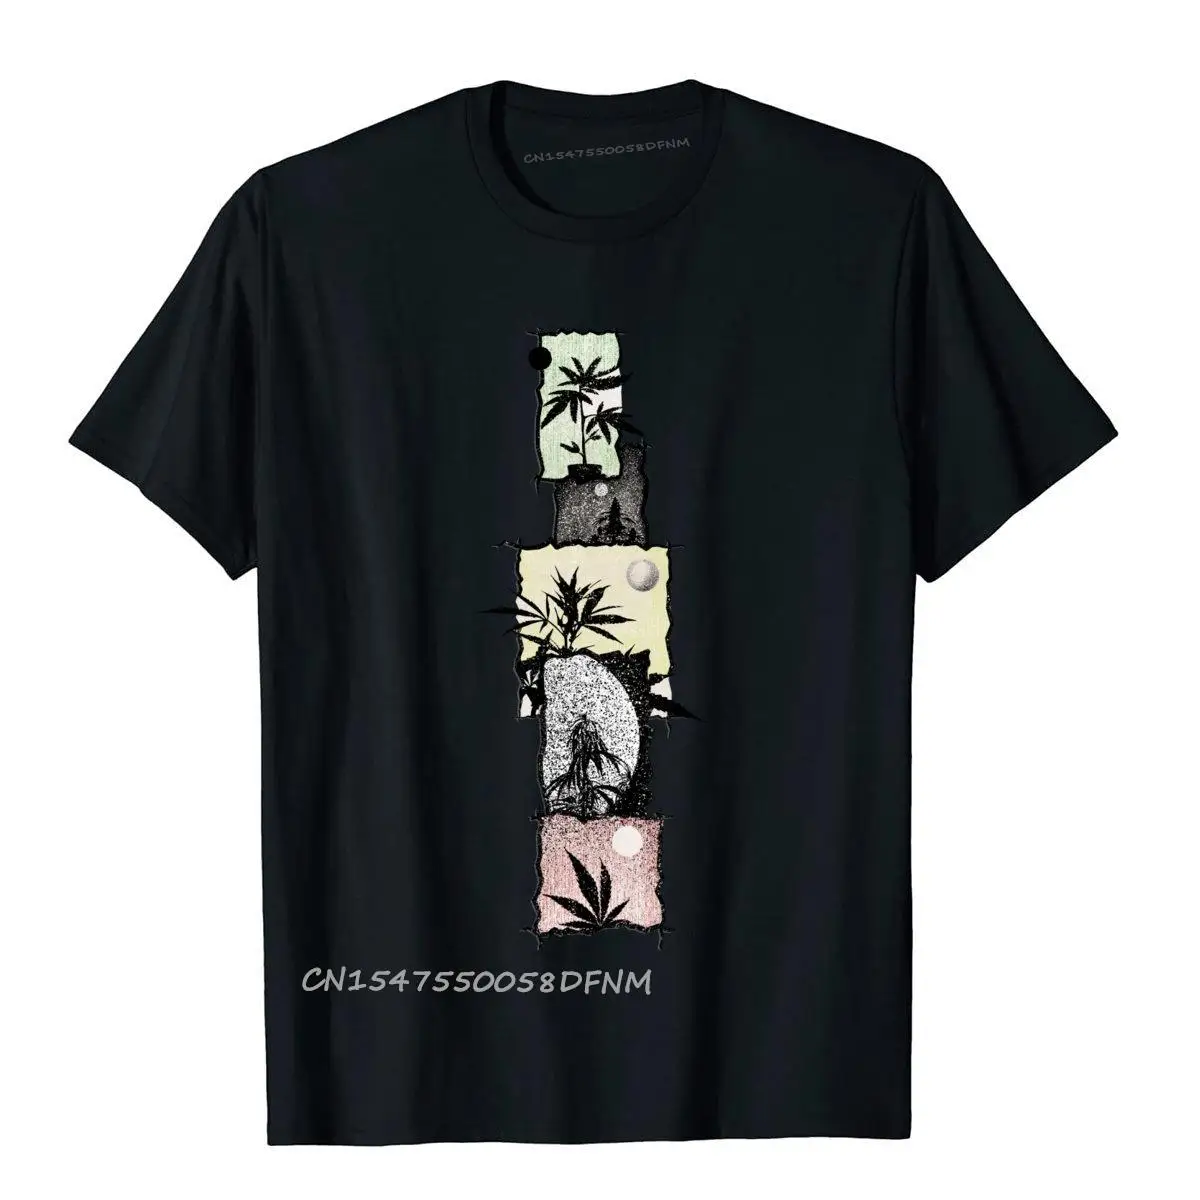 

Moto Biker Weed Tower Top T-shirts T Shirt for Men Graphic Cotton Holiday T Shirts Luxury Camiseta